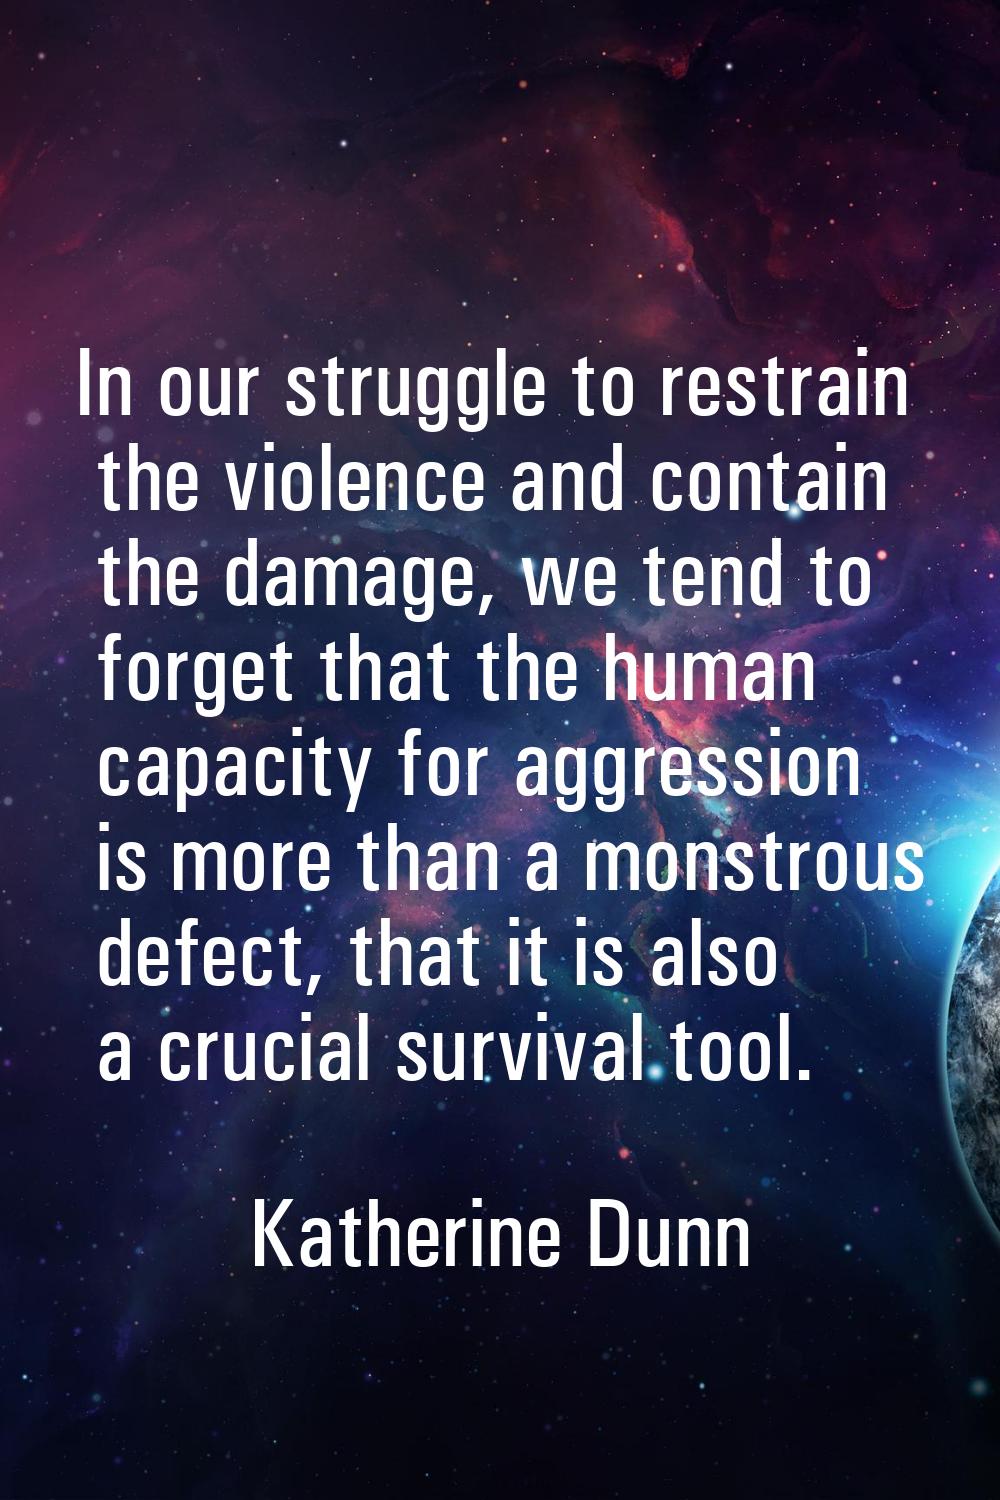 In our struggle to restrain the violence and contain the damage, we tend to forget that the human c